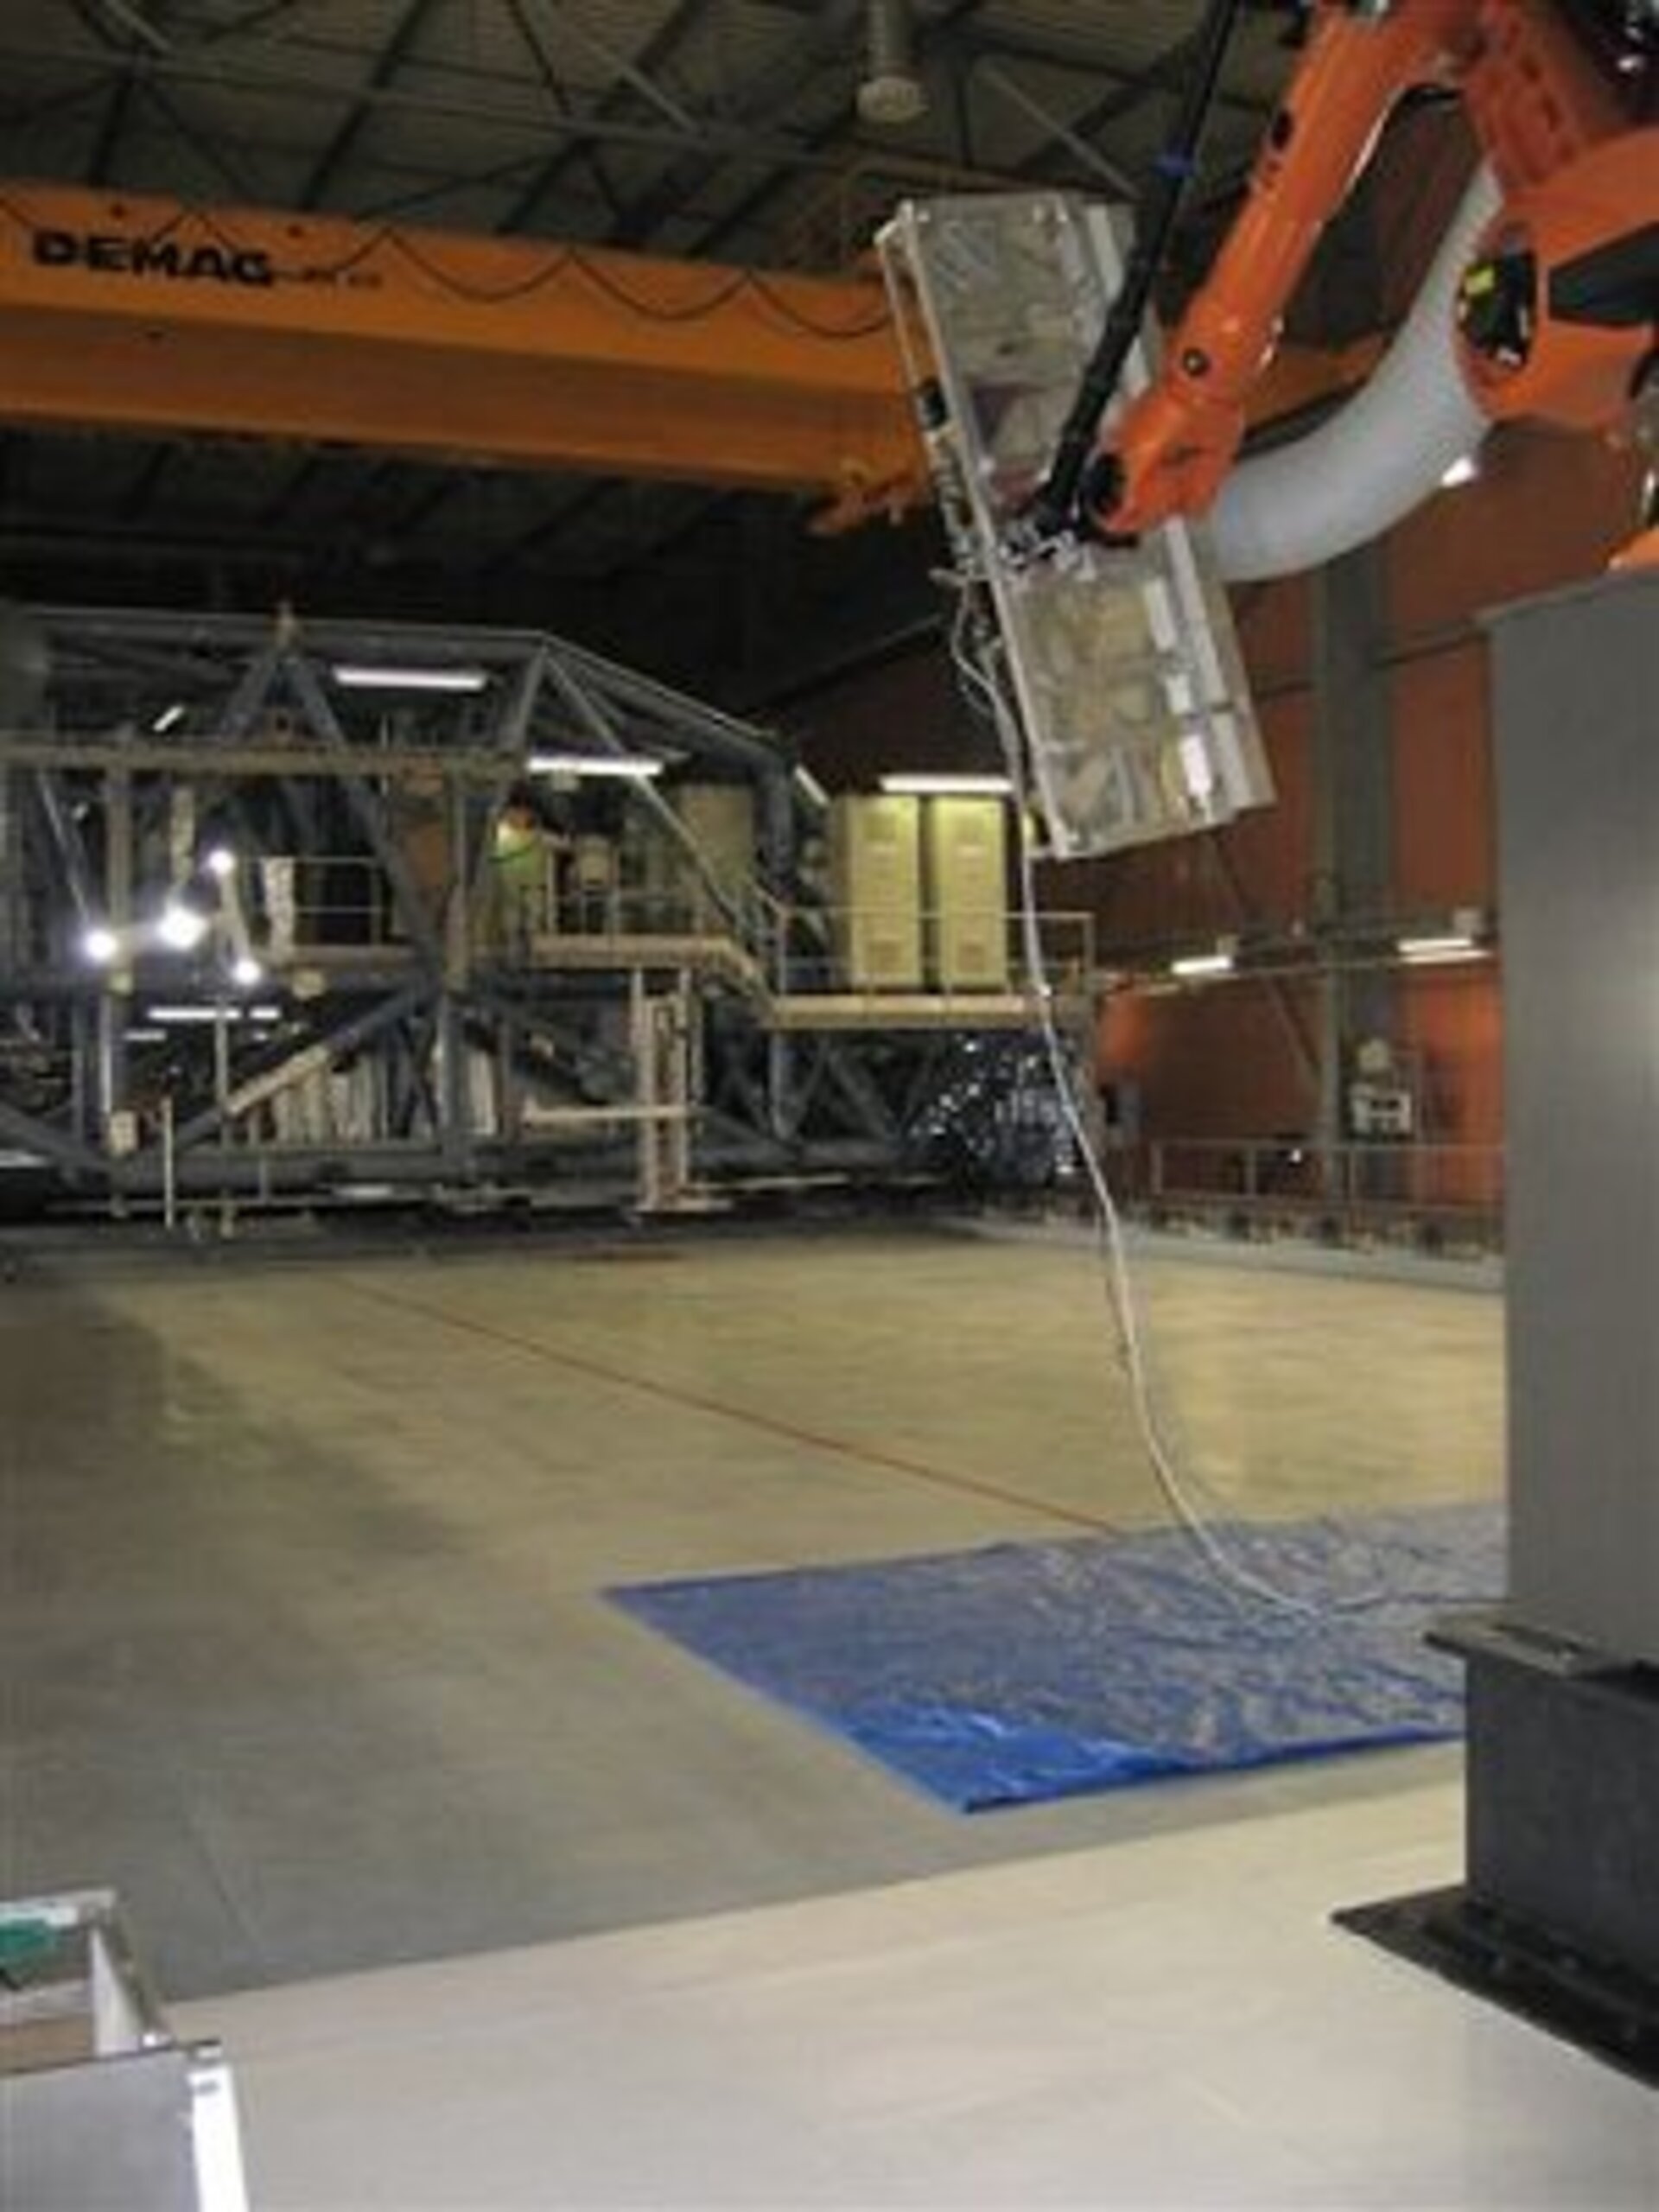 The videometer was mounted on an articulated robotic arm